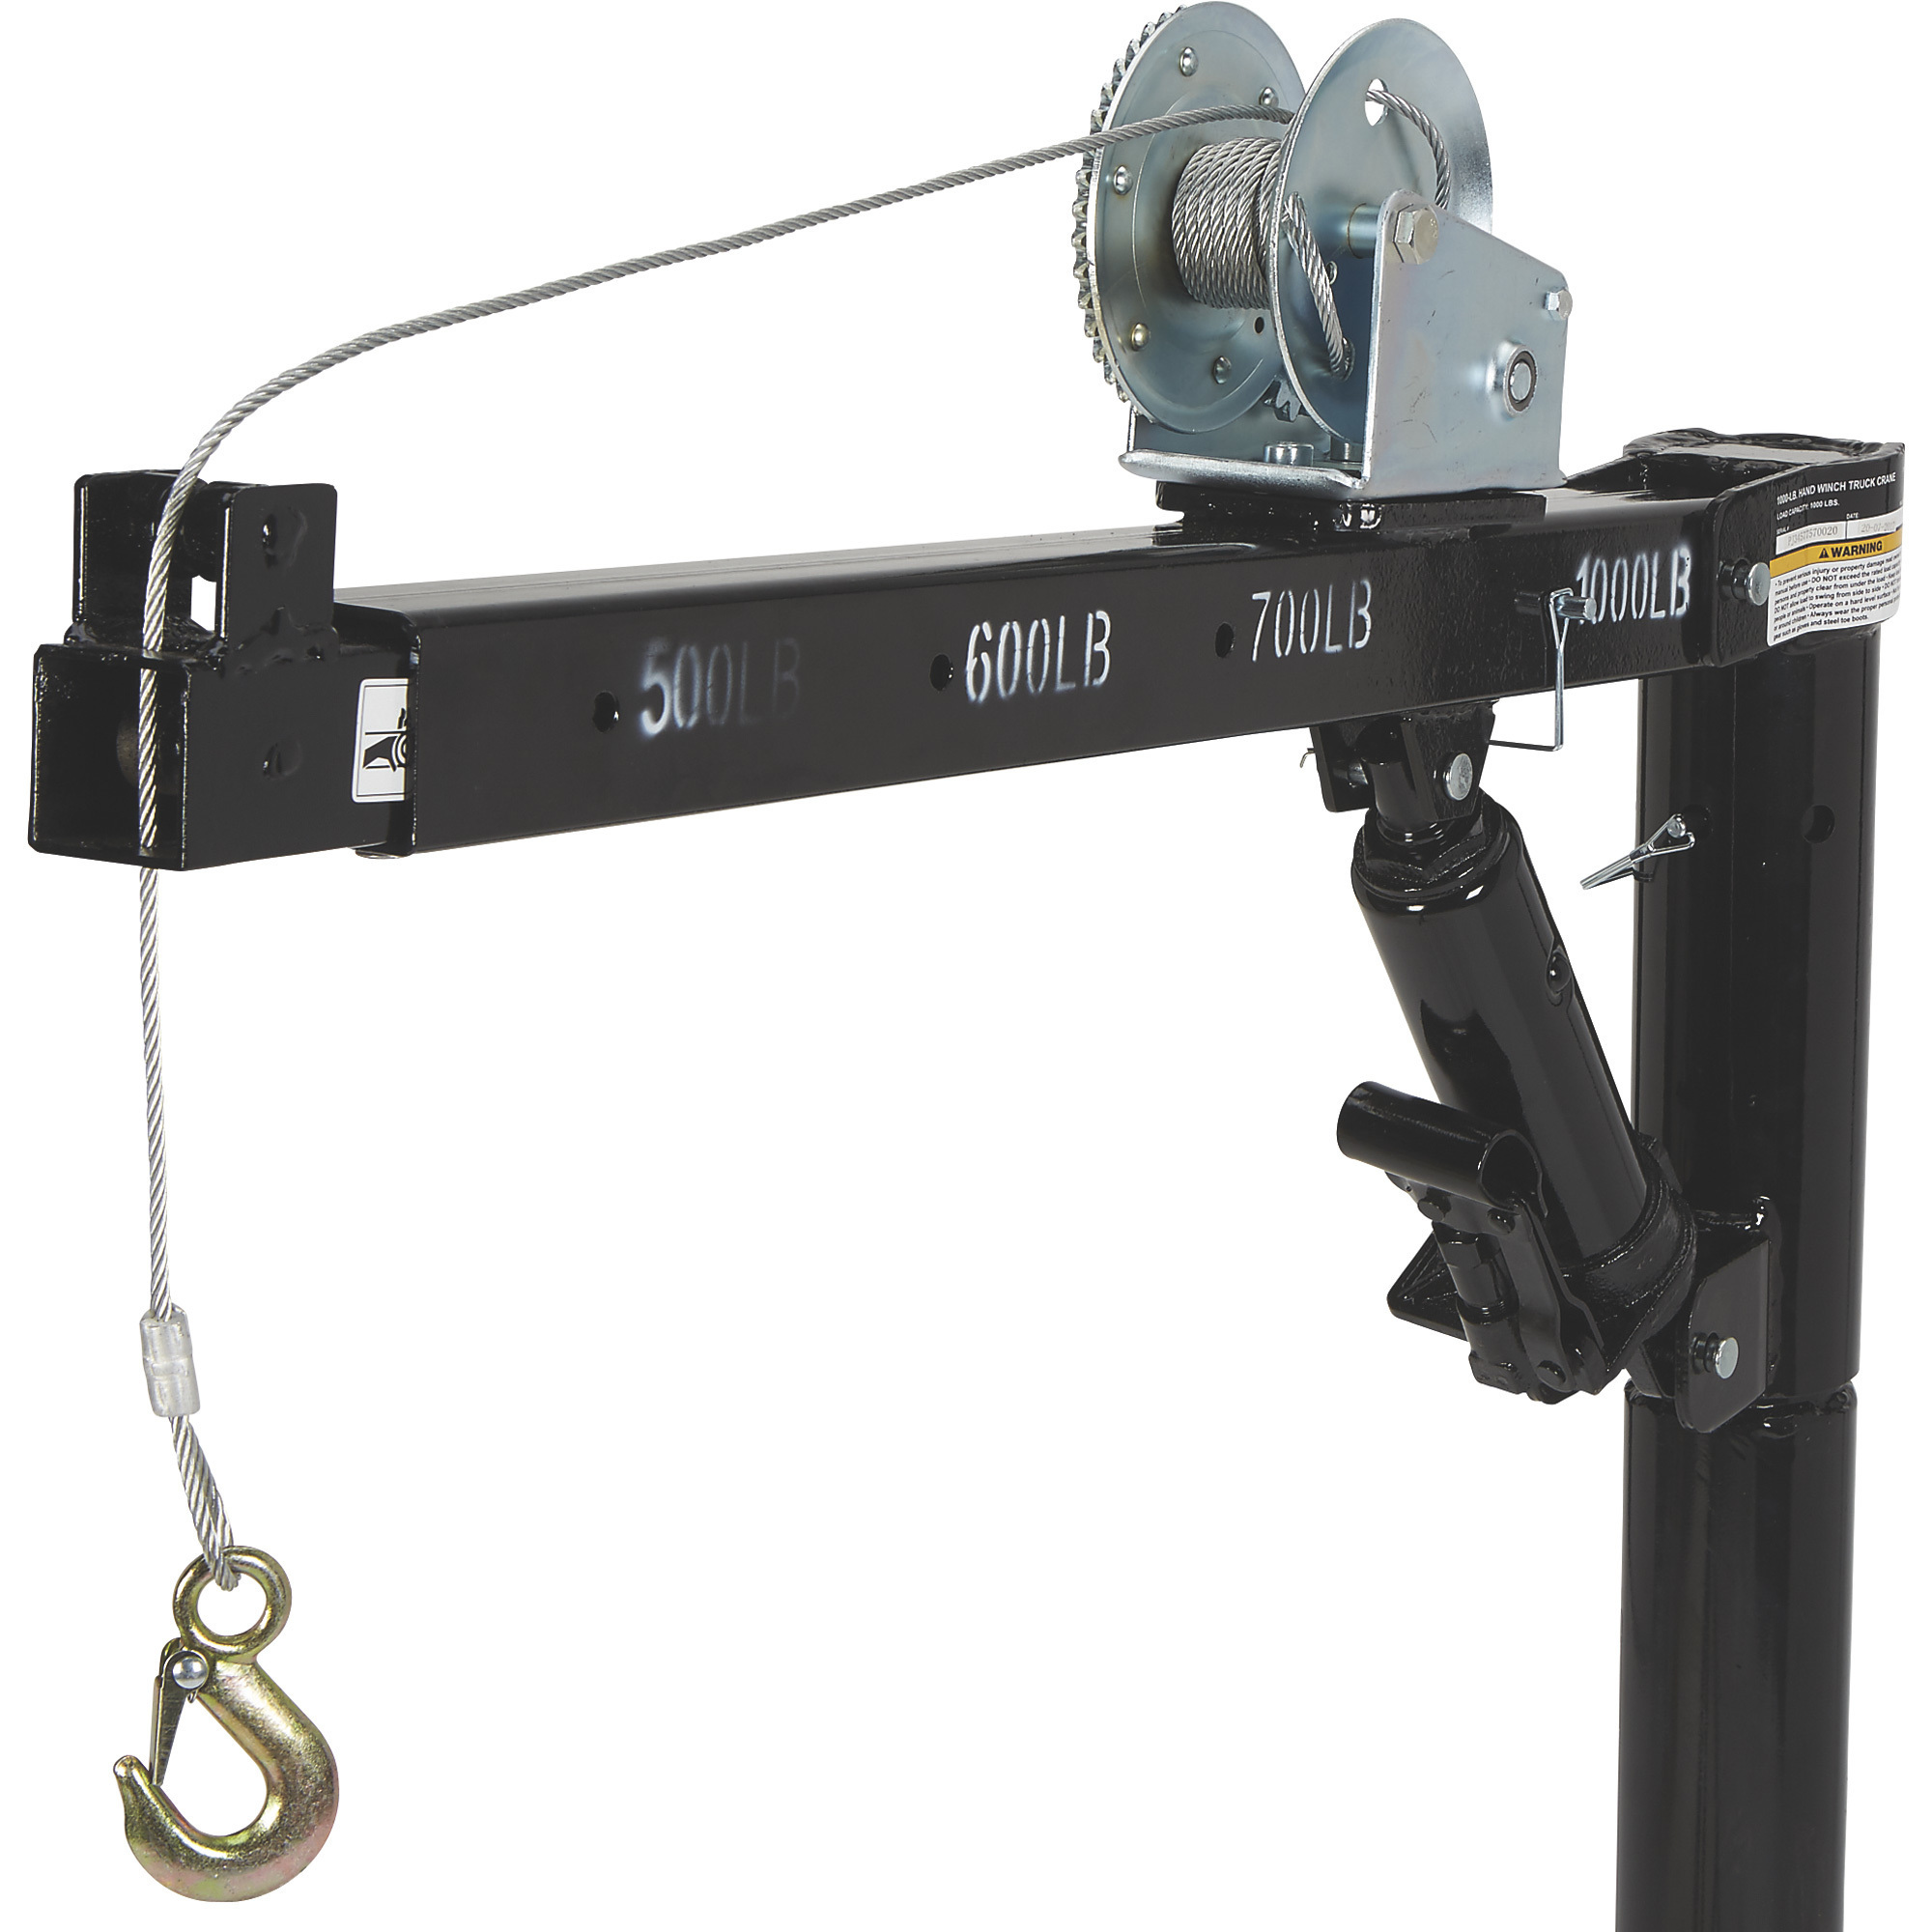 Ultra-Tow Pickup Truck Crane With Hand Winch, 1000-Lb. Capacity, 33-53 ...